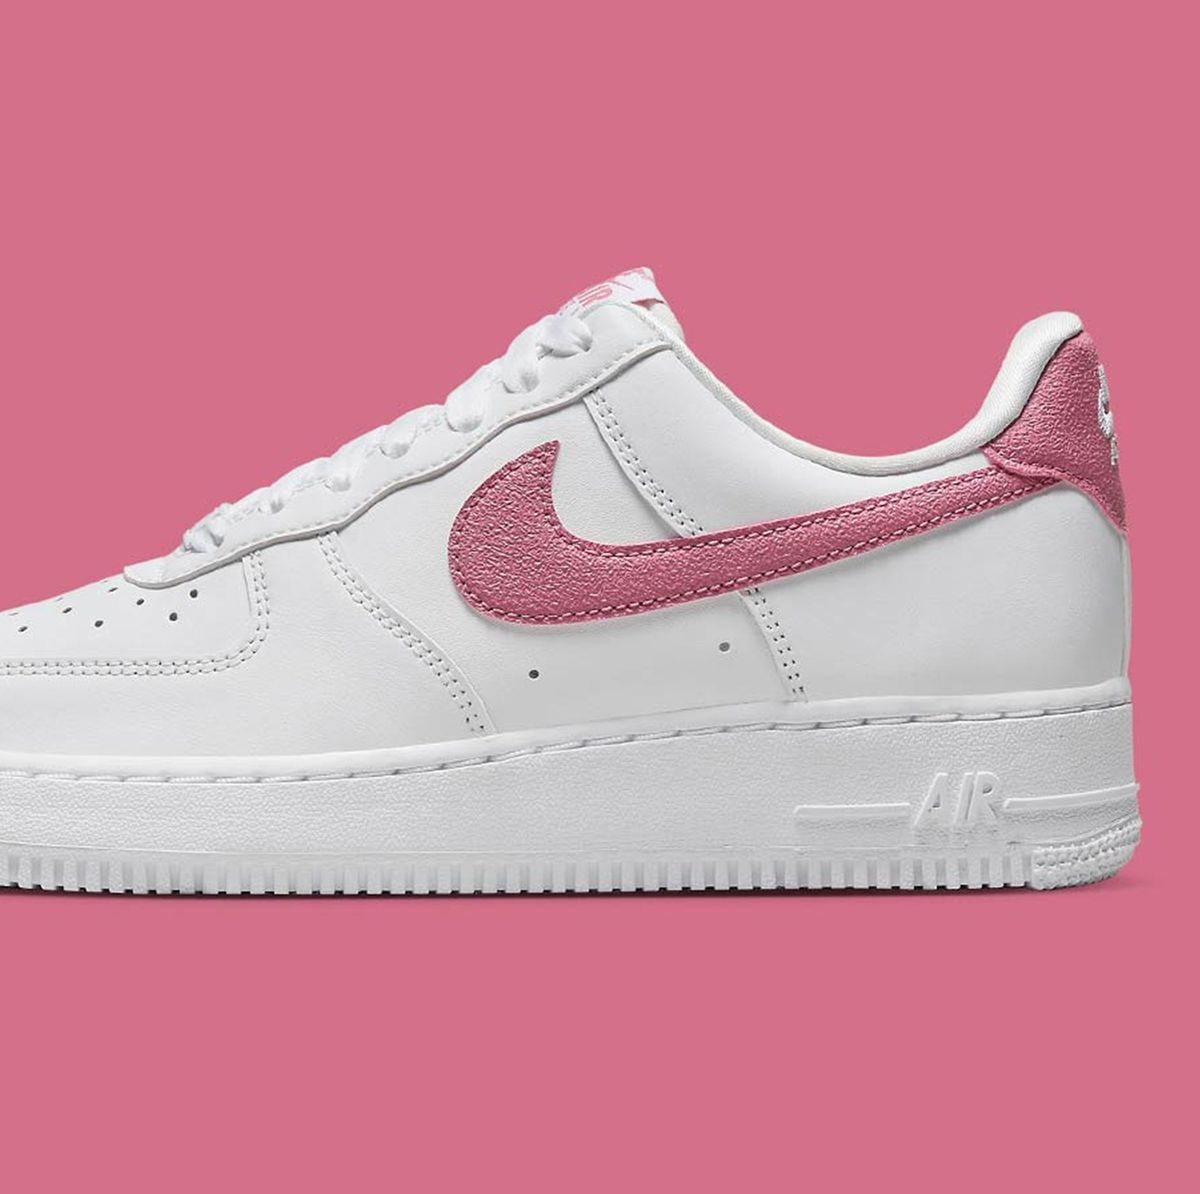 Siete rojo Adviento Nike Is Pushing Pink Shoes. Can the Color Make a Comeback Again?